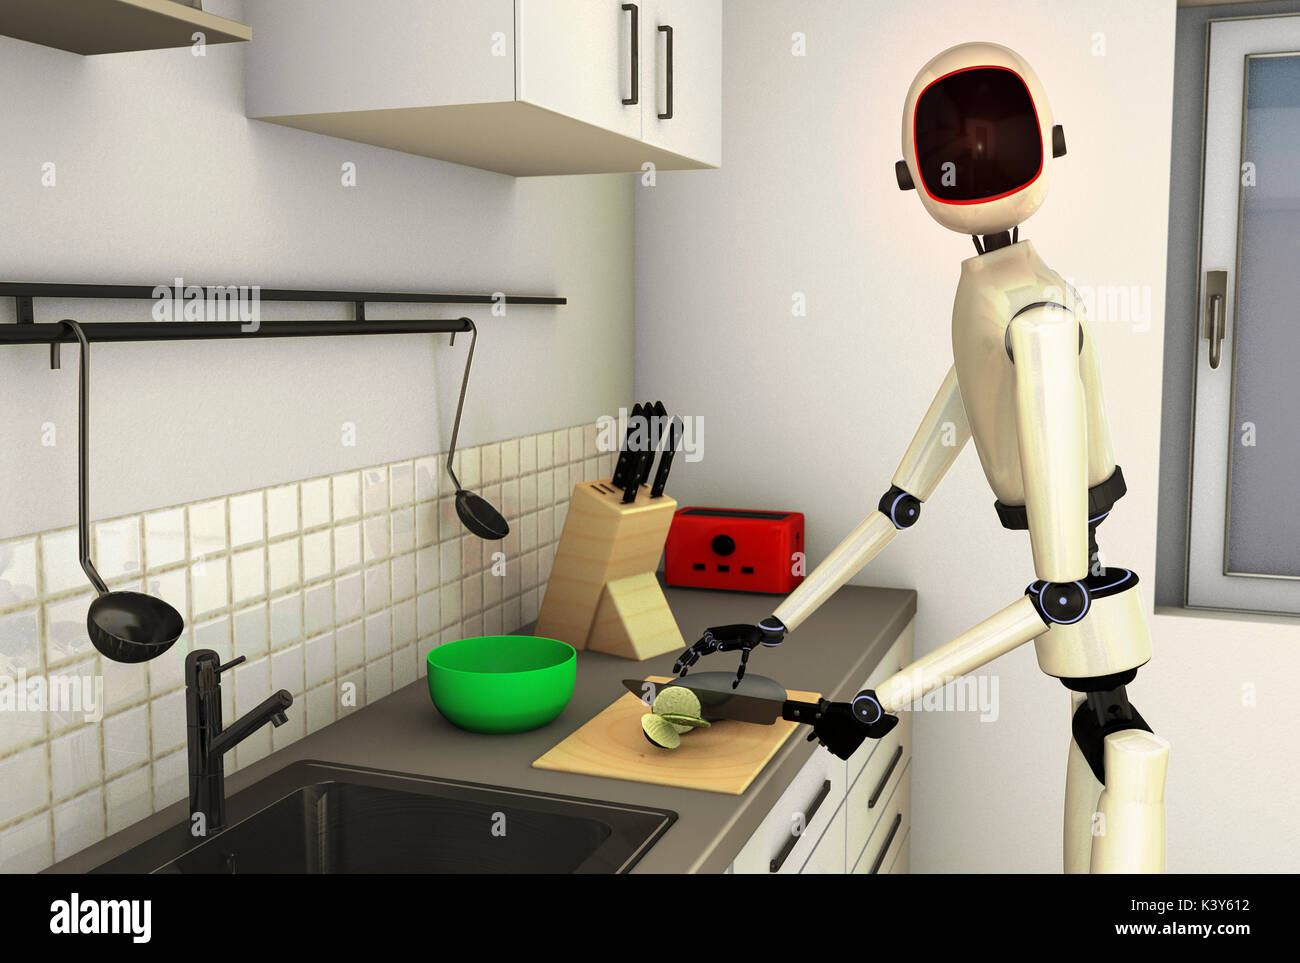 https://c8.alamy.com/comp/K3Y612/a-robot-makes-the-food-in-the-kitchen-K3Y612.jpg